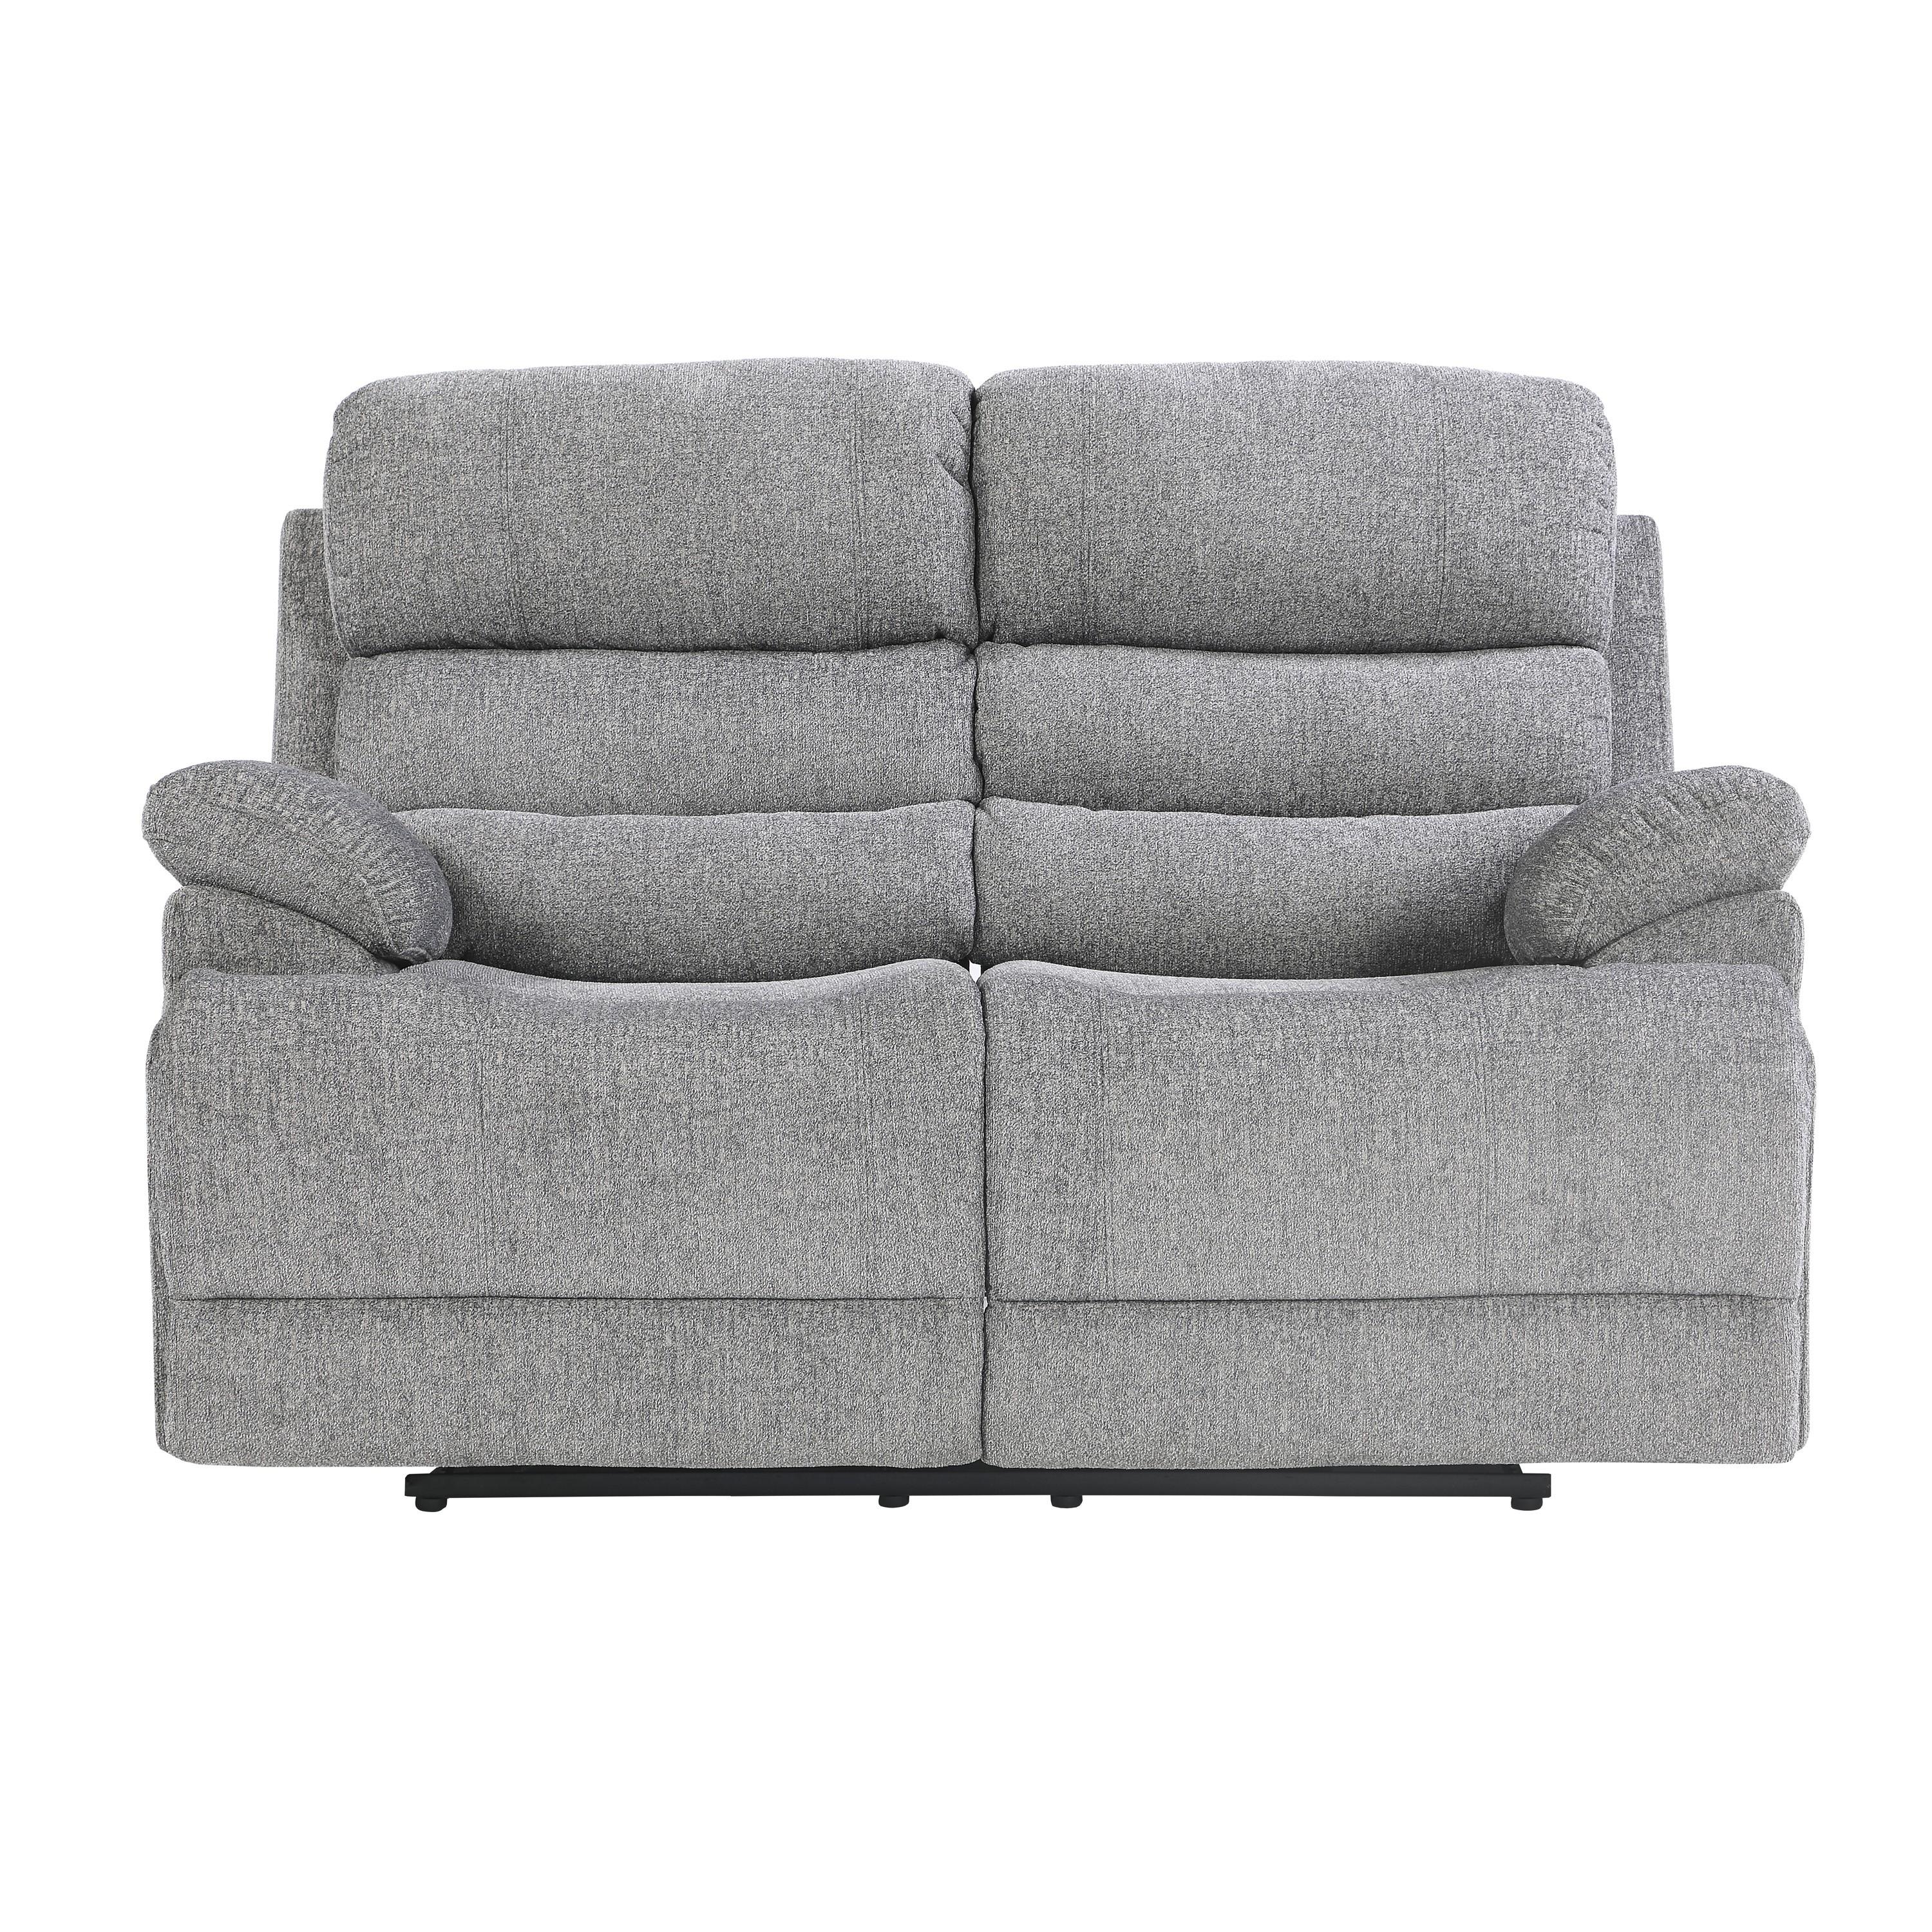 Transitional Reclining Loveseat 9422FS-2 Sherbrook 9422FS-2 in Gray Chenille